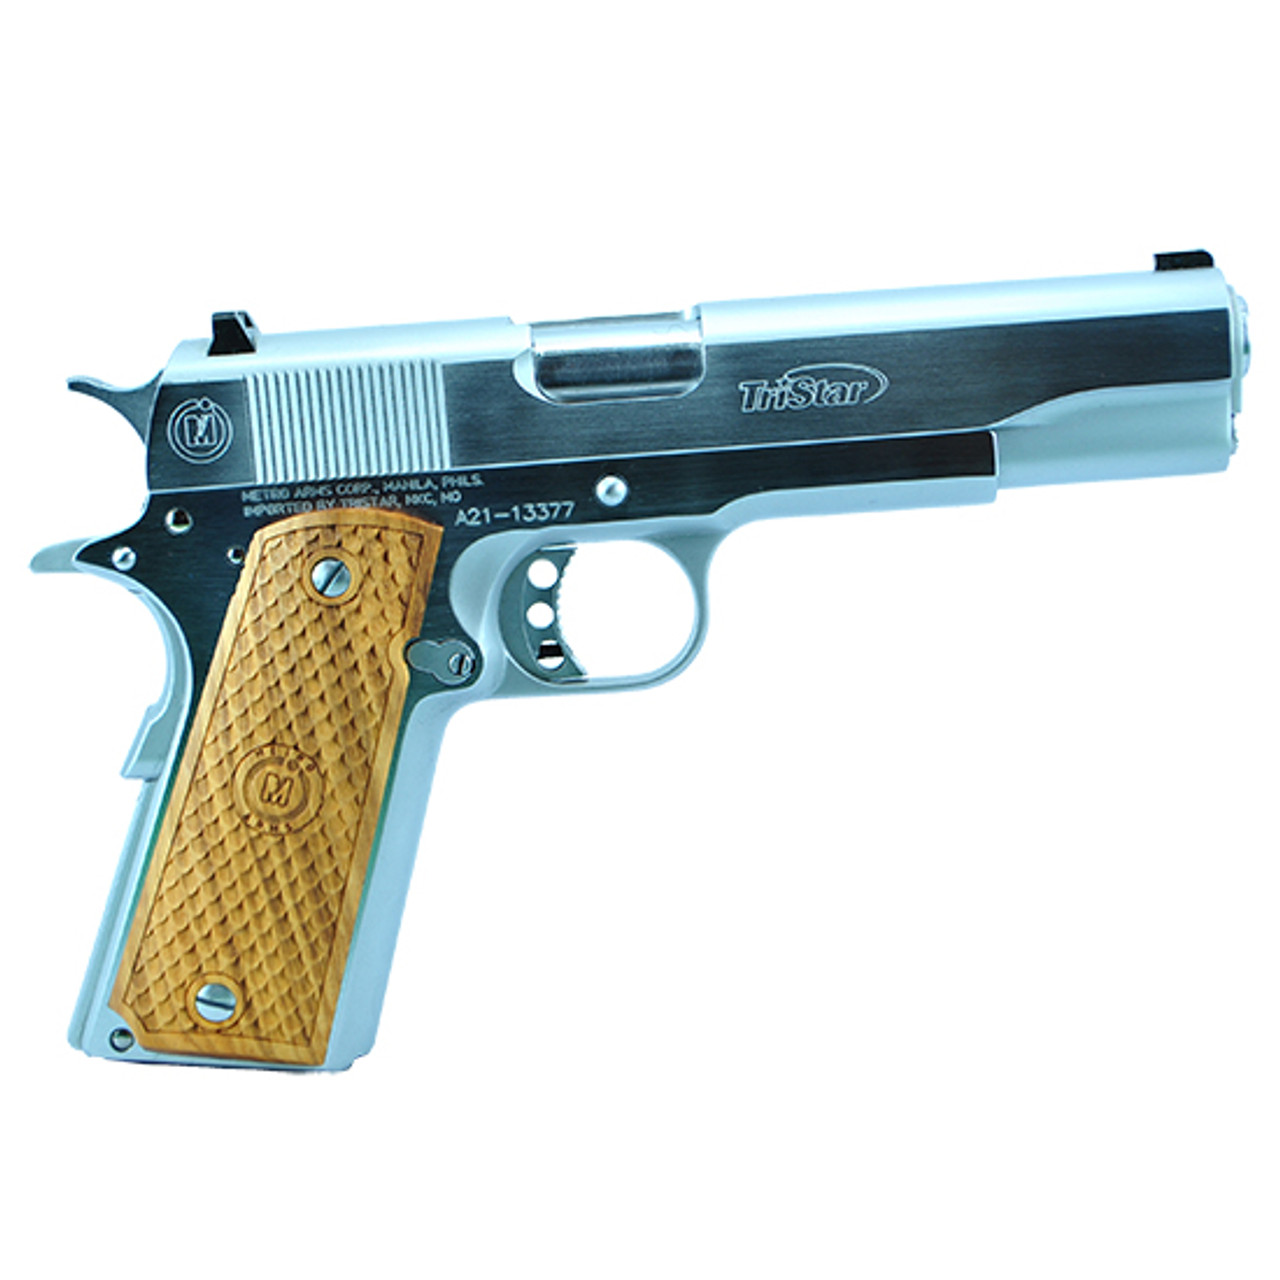 American Classic Government 1911, 9mm, 5 Barrel, Chrome Finish, Silver,  Fixed Sights, Manual Thumb Safety, 8rd - Impact Guns